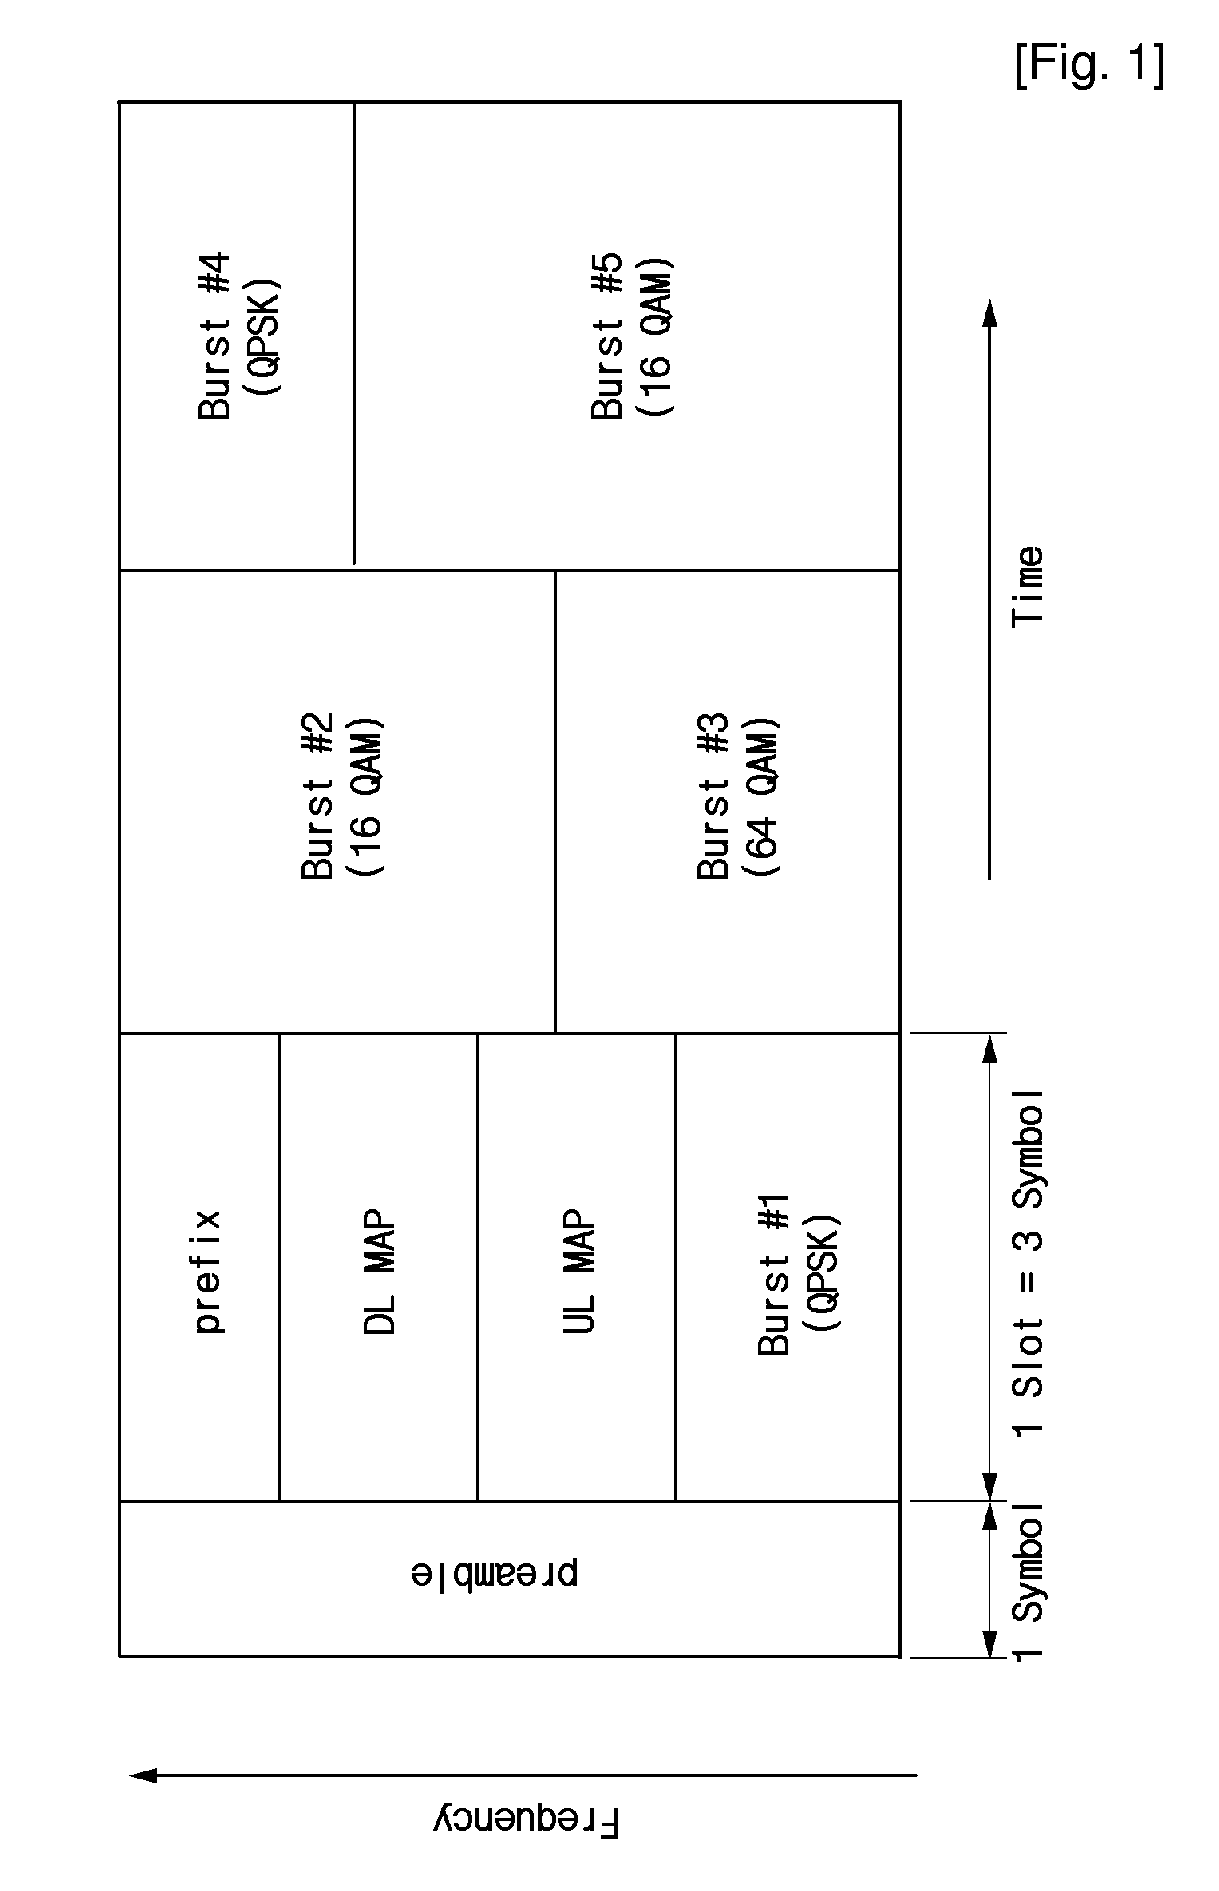 Demodulation Apparatus for Efficiently Embodying Adaptive Modulation and Coding Method in Ofdma Based Packet Communication System and Method Thereof